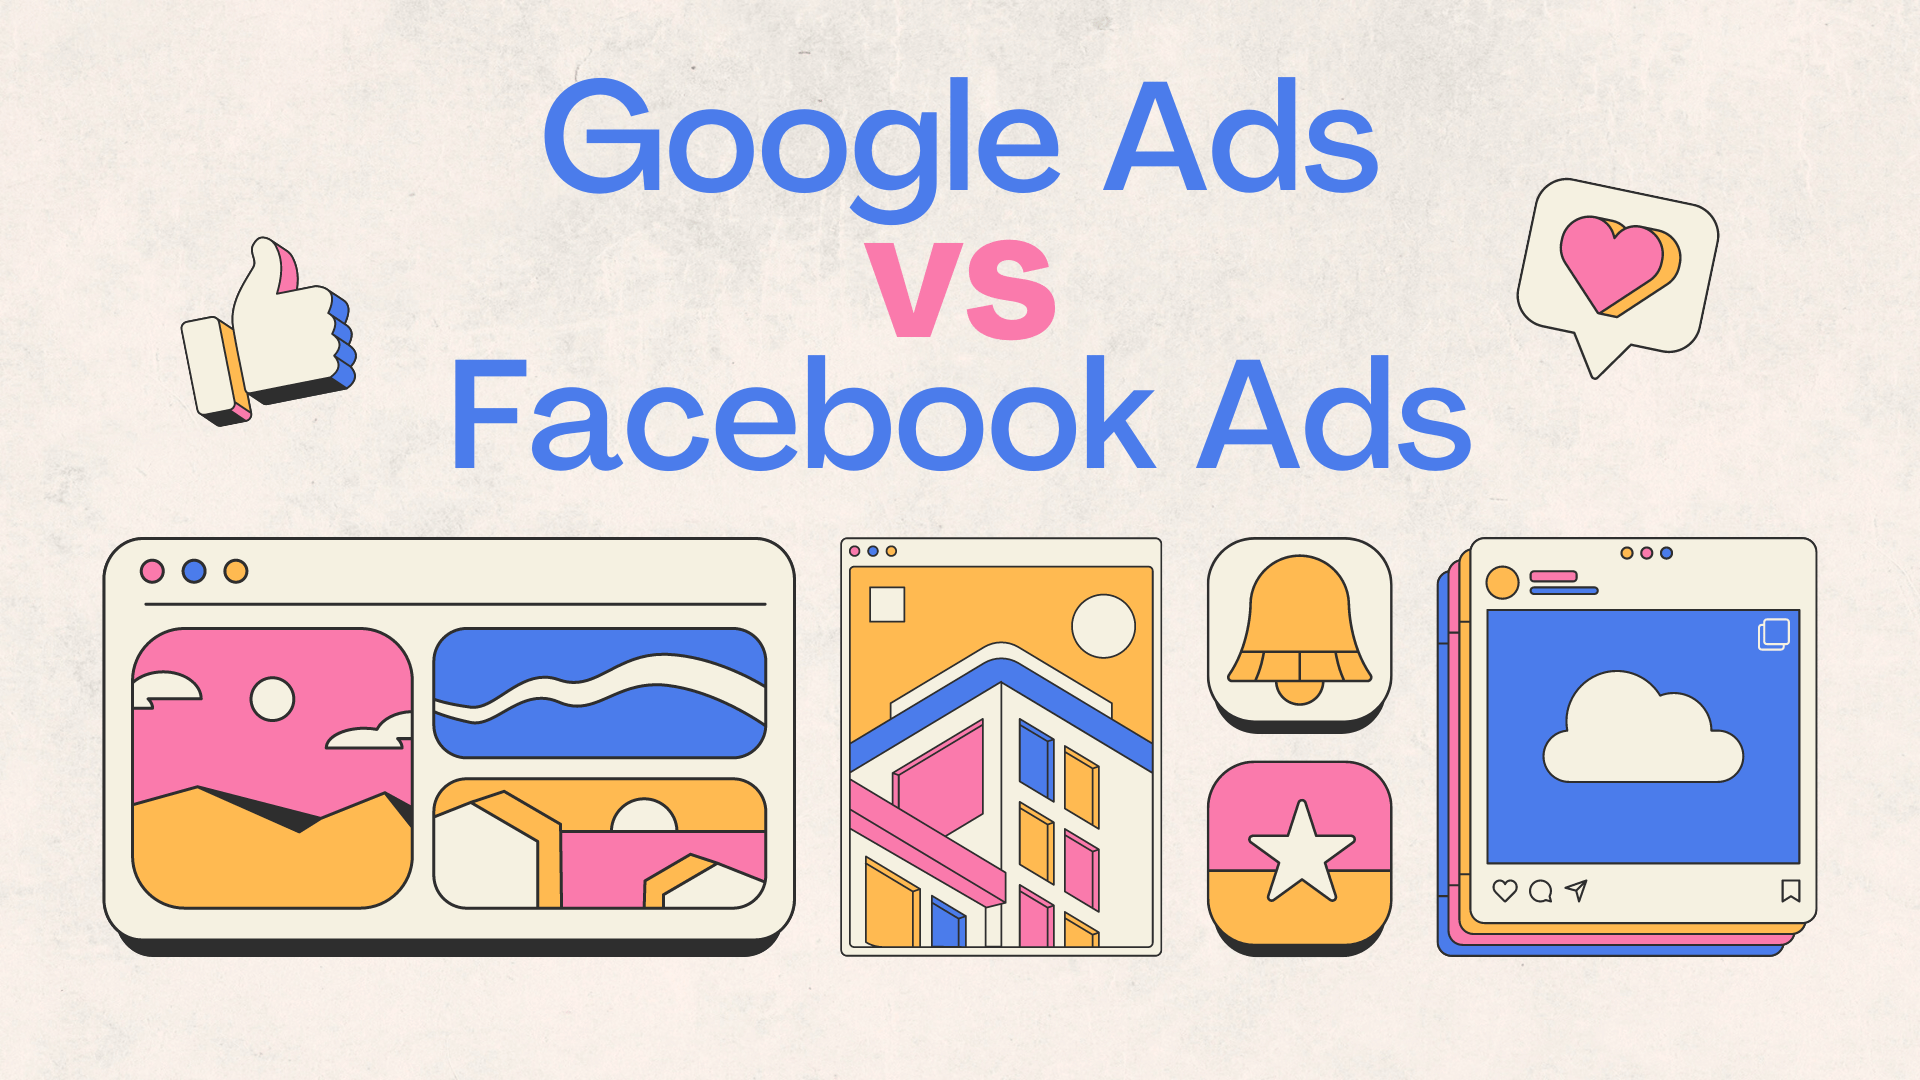 The differences between Google Ads vs. Facebook Ads